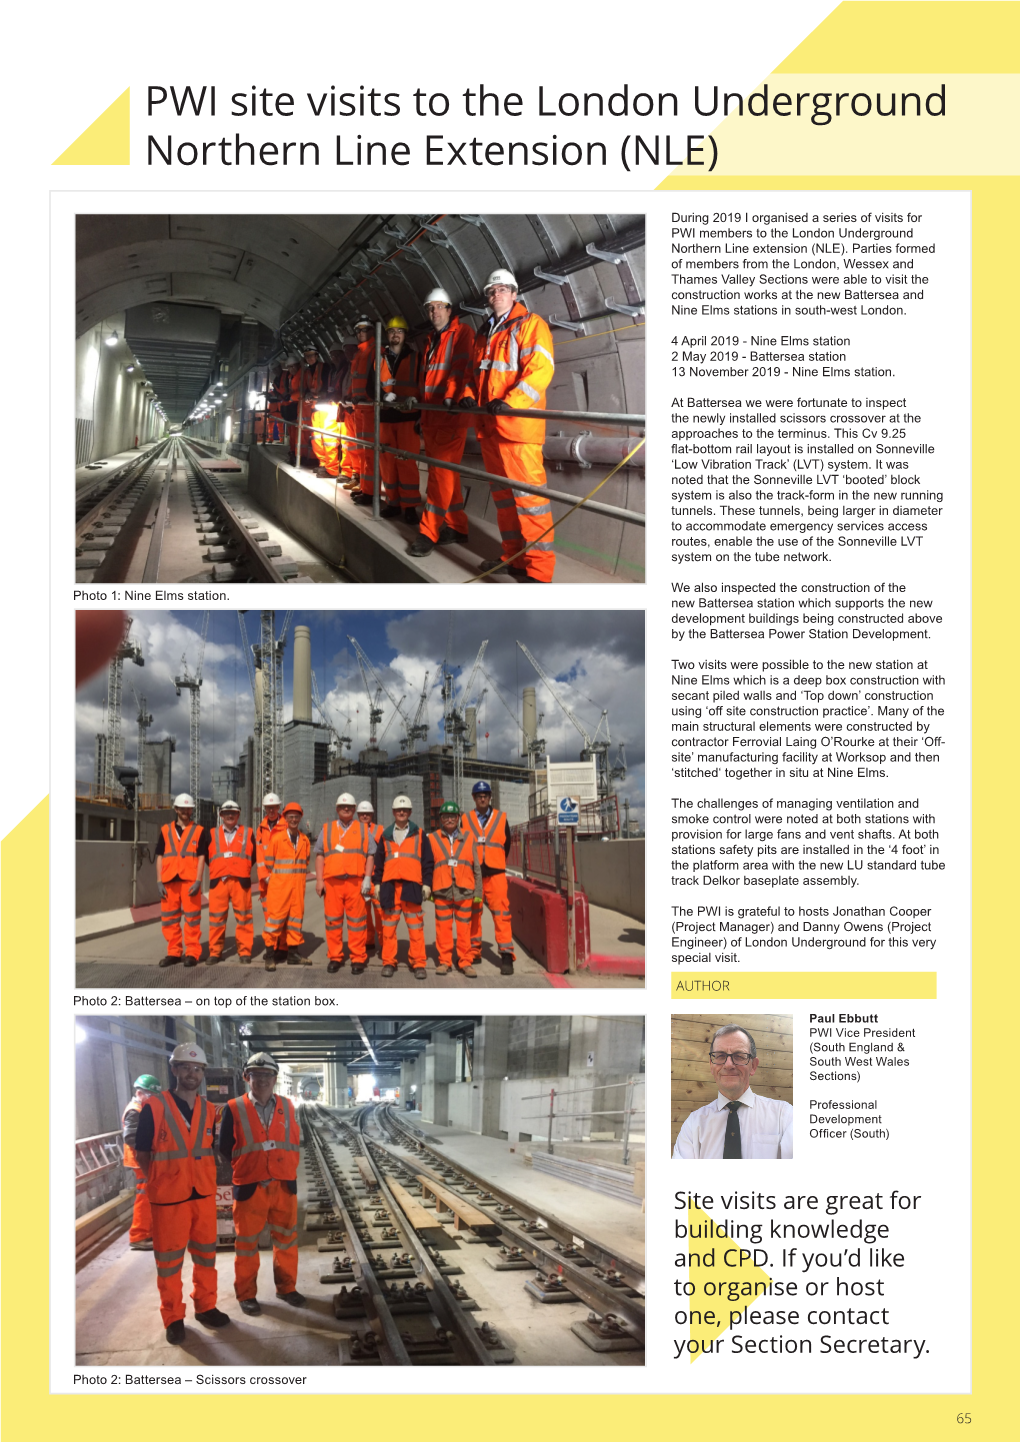 PWI Site Visits to the London Underground Northern Line Extension (NLE)